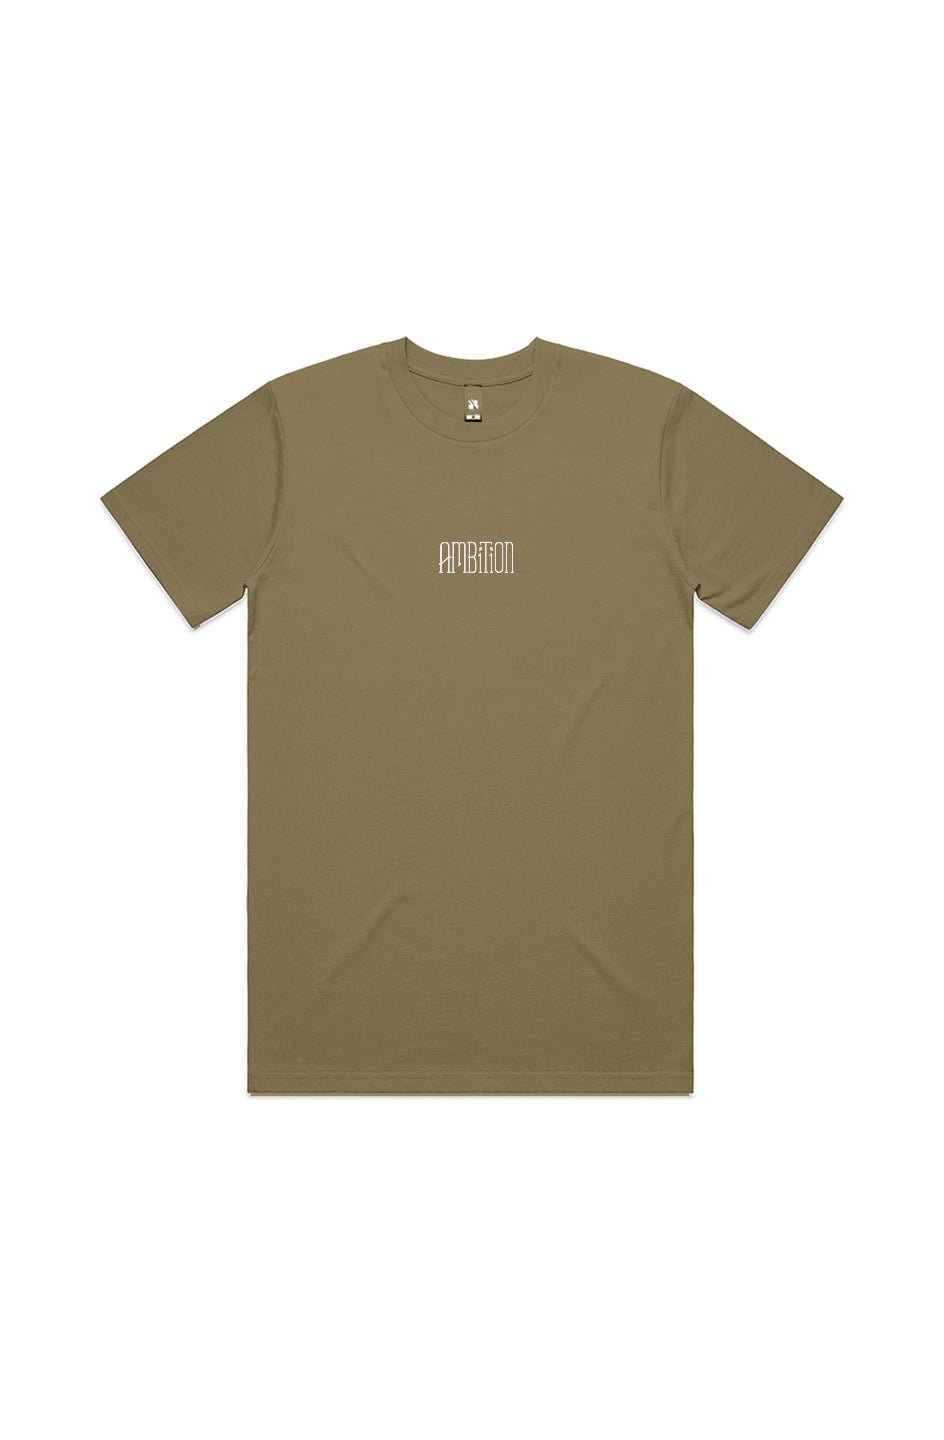 AMBITION TEE - GOLD